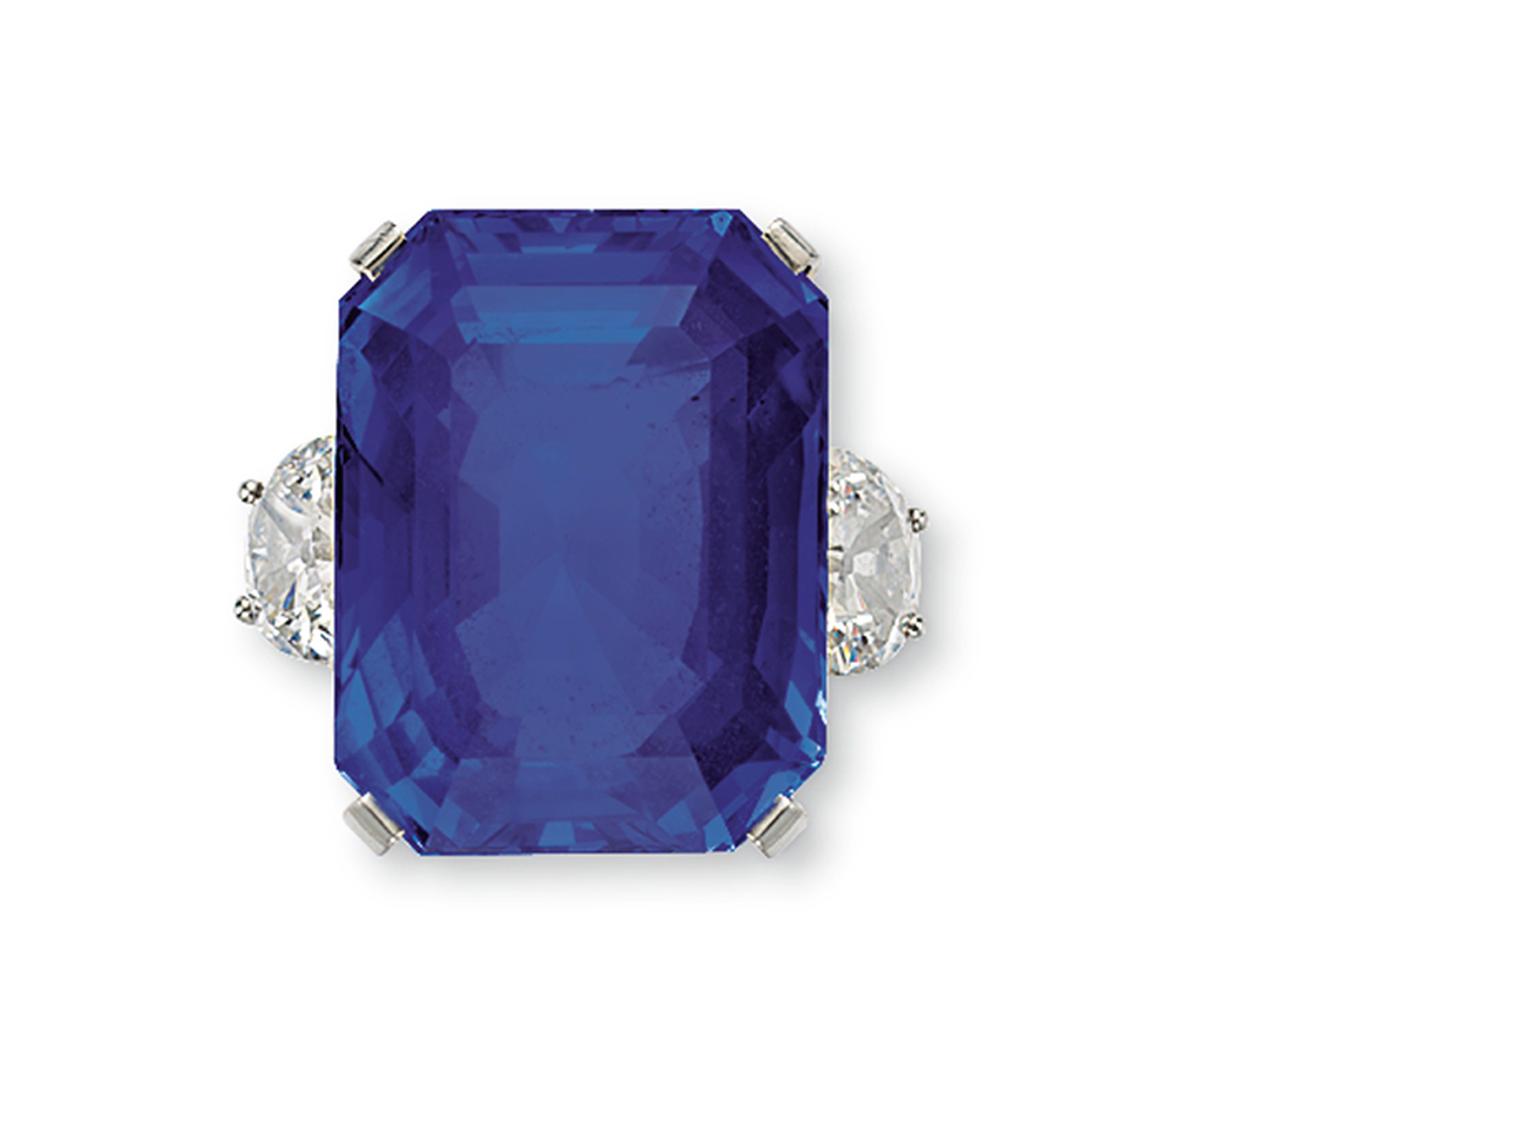 Christie’s New York sold the 63.65ct Ceylon sapphire and diamond ring by Tiffany & Co. for $587,000.